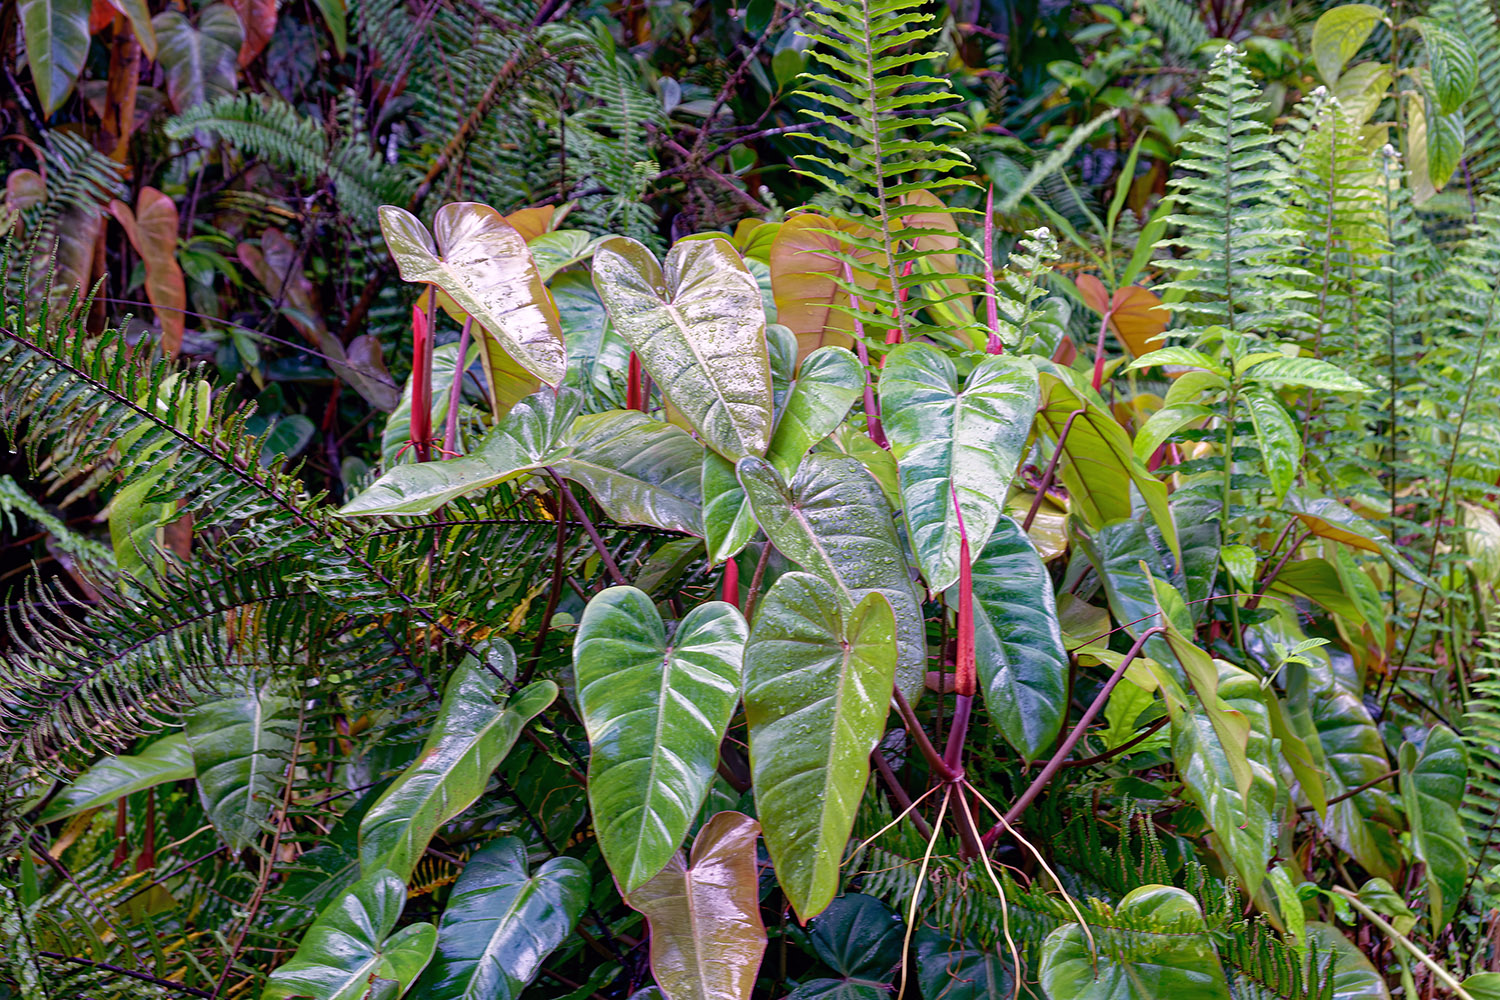 In this rainforest-like environment, plants thrive